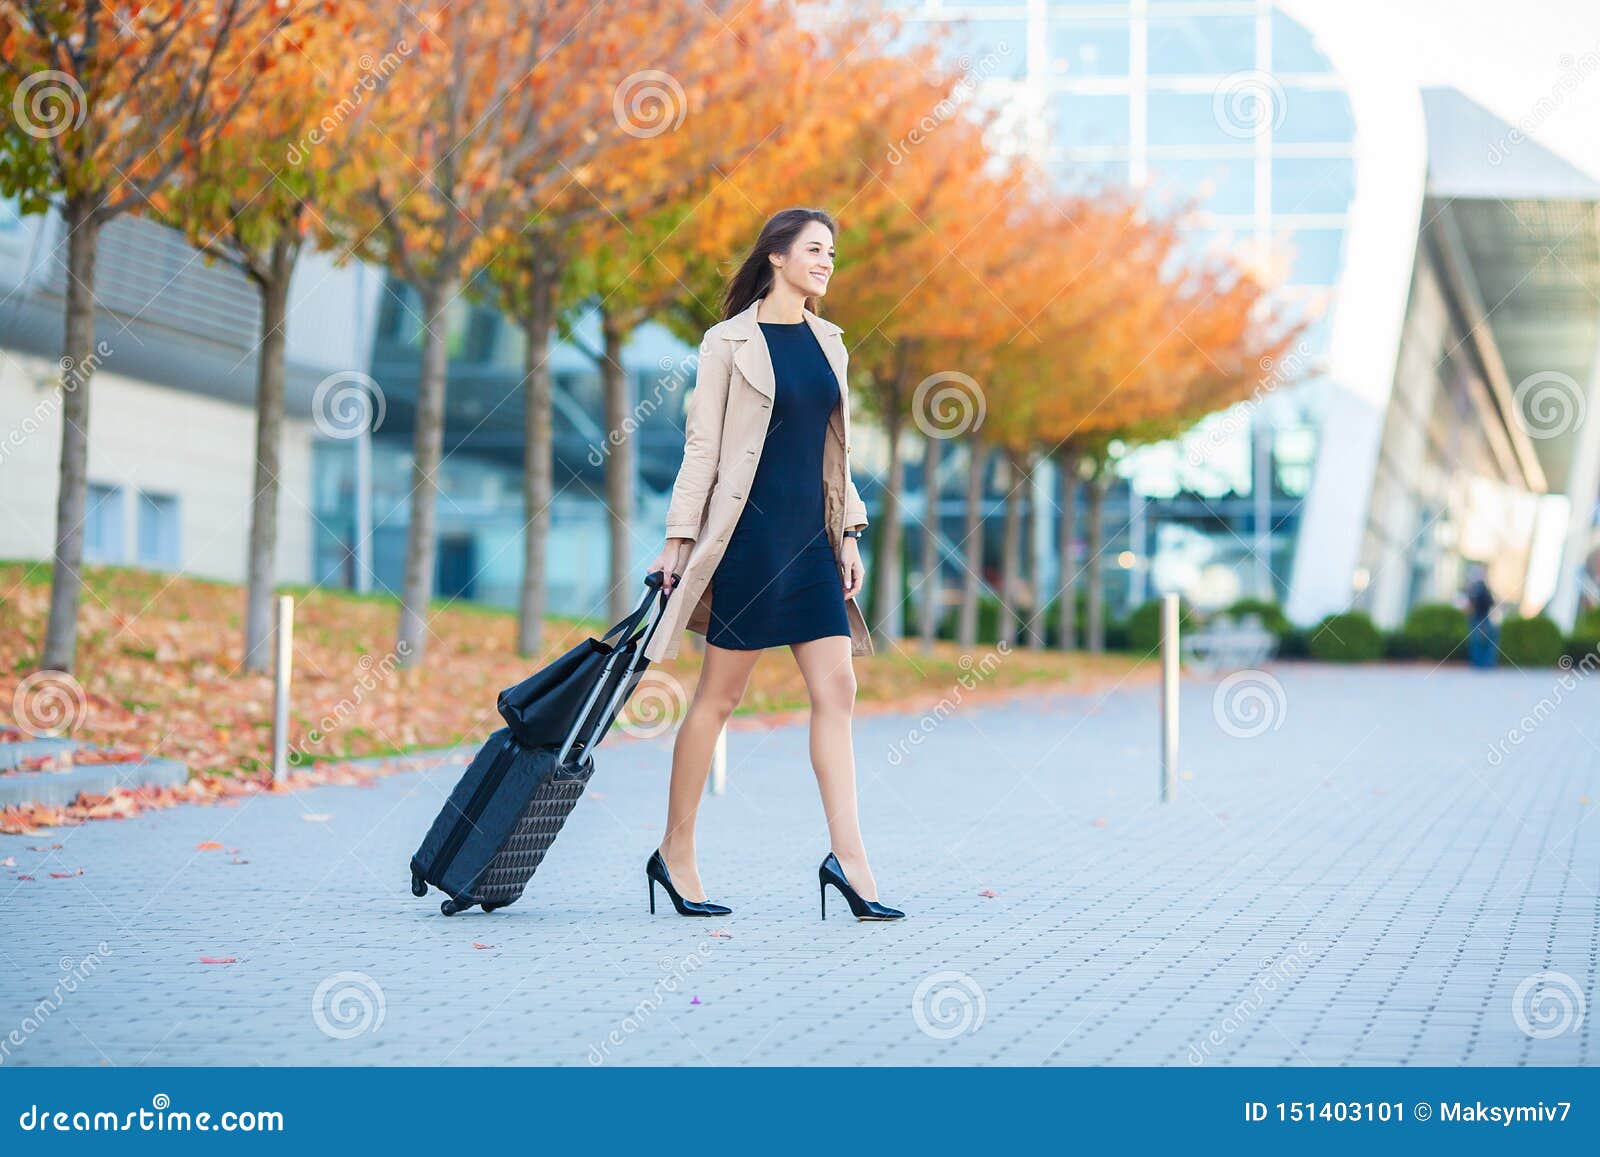 vacation. smiling female passenger proceeding to exit gate pulling suitcase through airport concourse